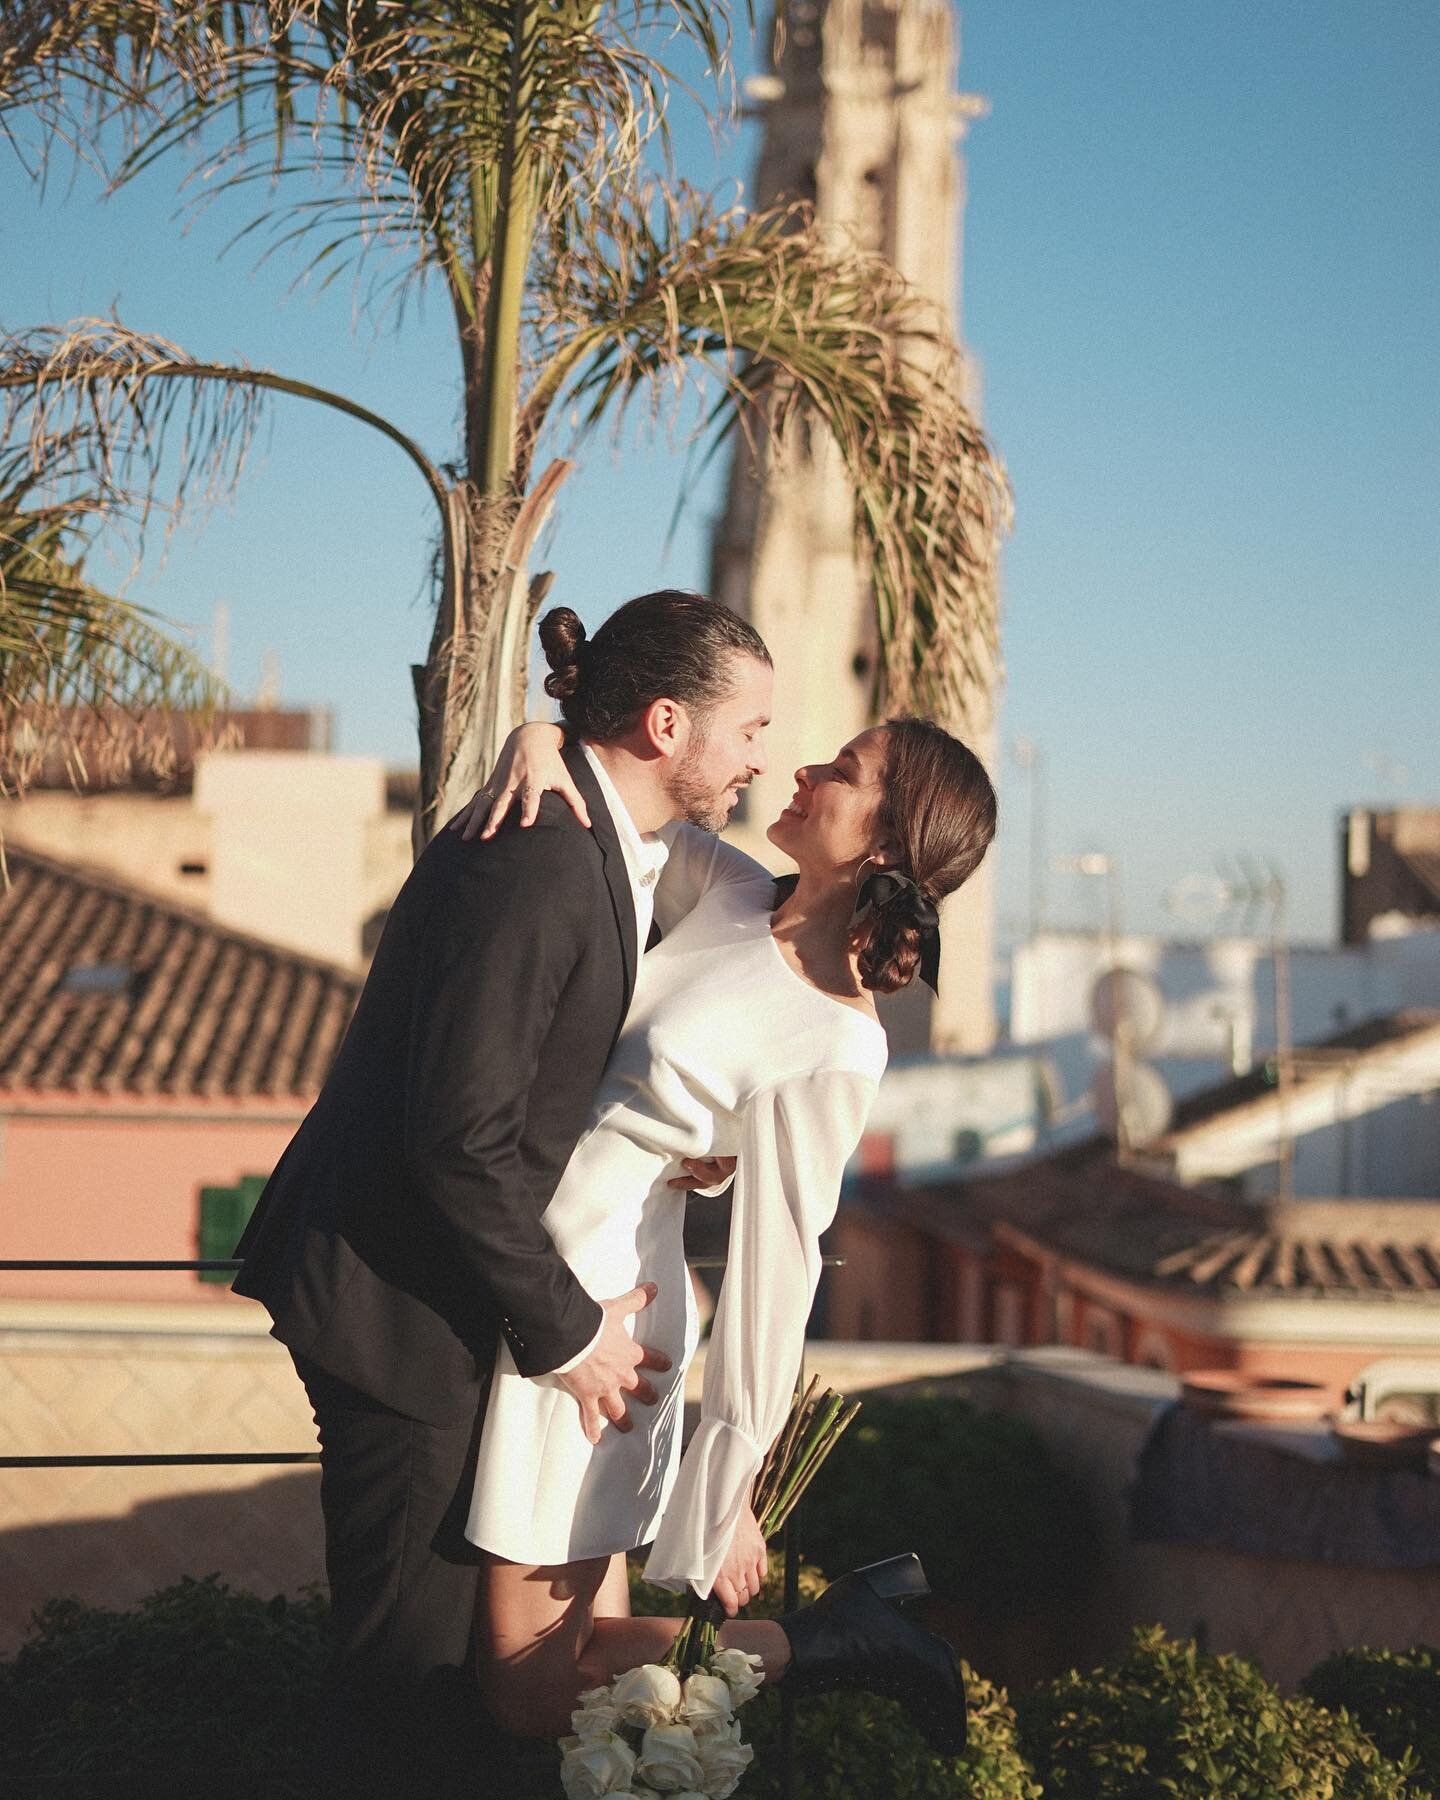 Short dress? Yes! 
Rooftop in Palma as your backdrop? Absolutely! 
February days that feel like spring time? Definitely!
De&iuml;na &amp; Josep, Palma 💘
.
.
Team of talented women:
Photographer @salbedarasweddings 
Styling &amp; dress @the_white_sho